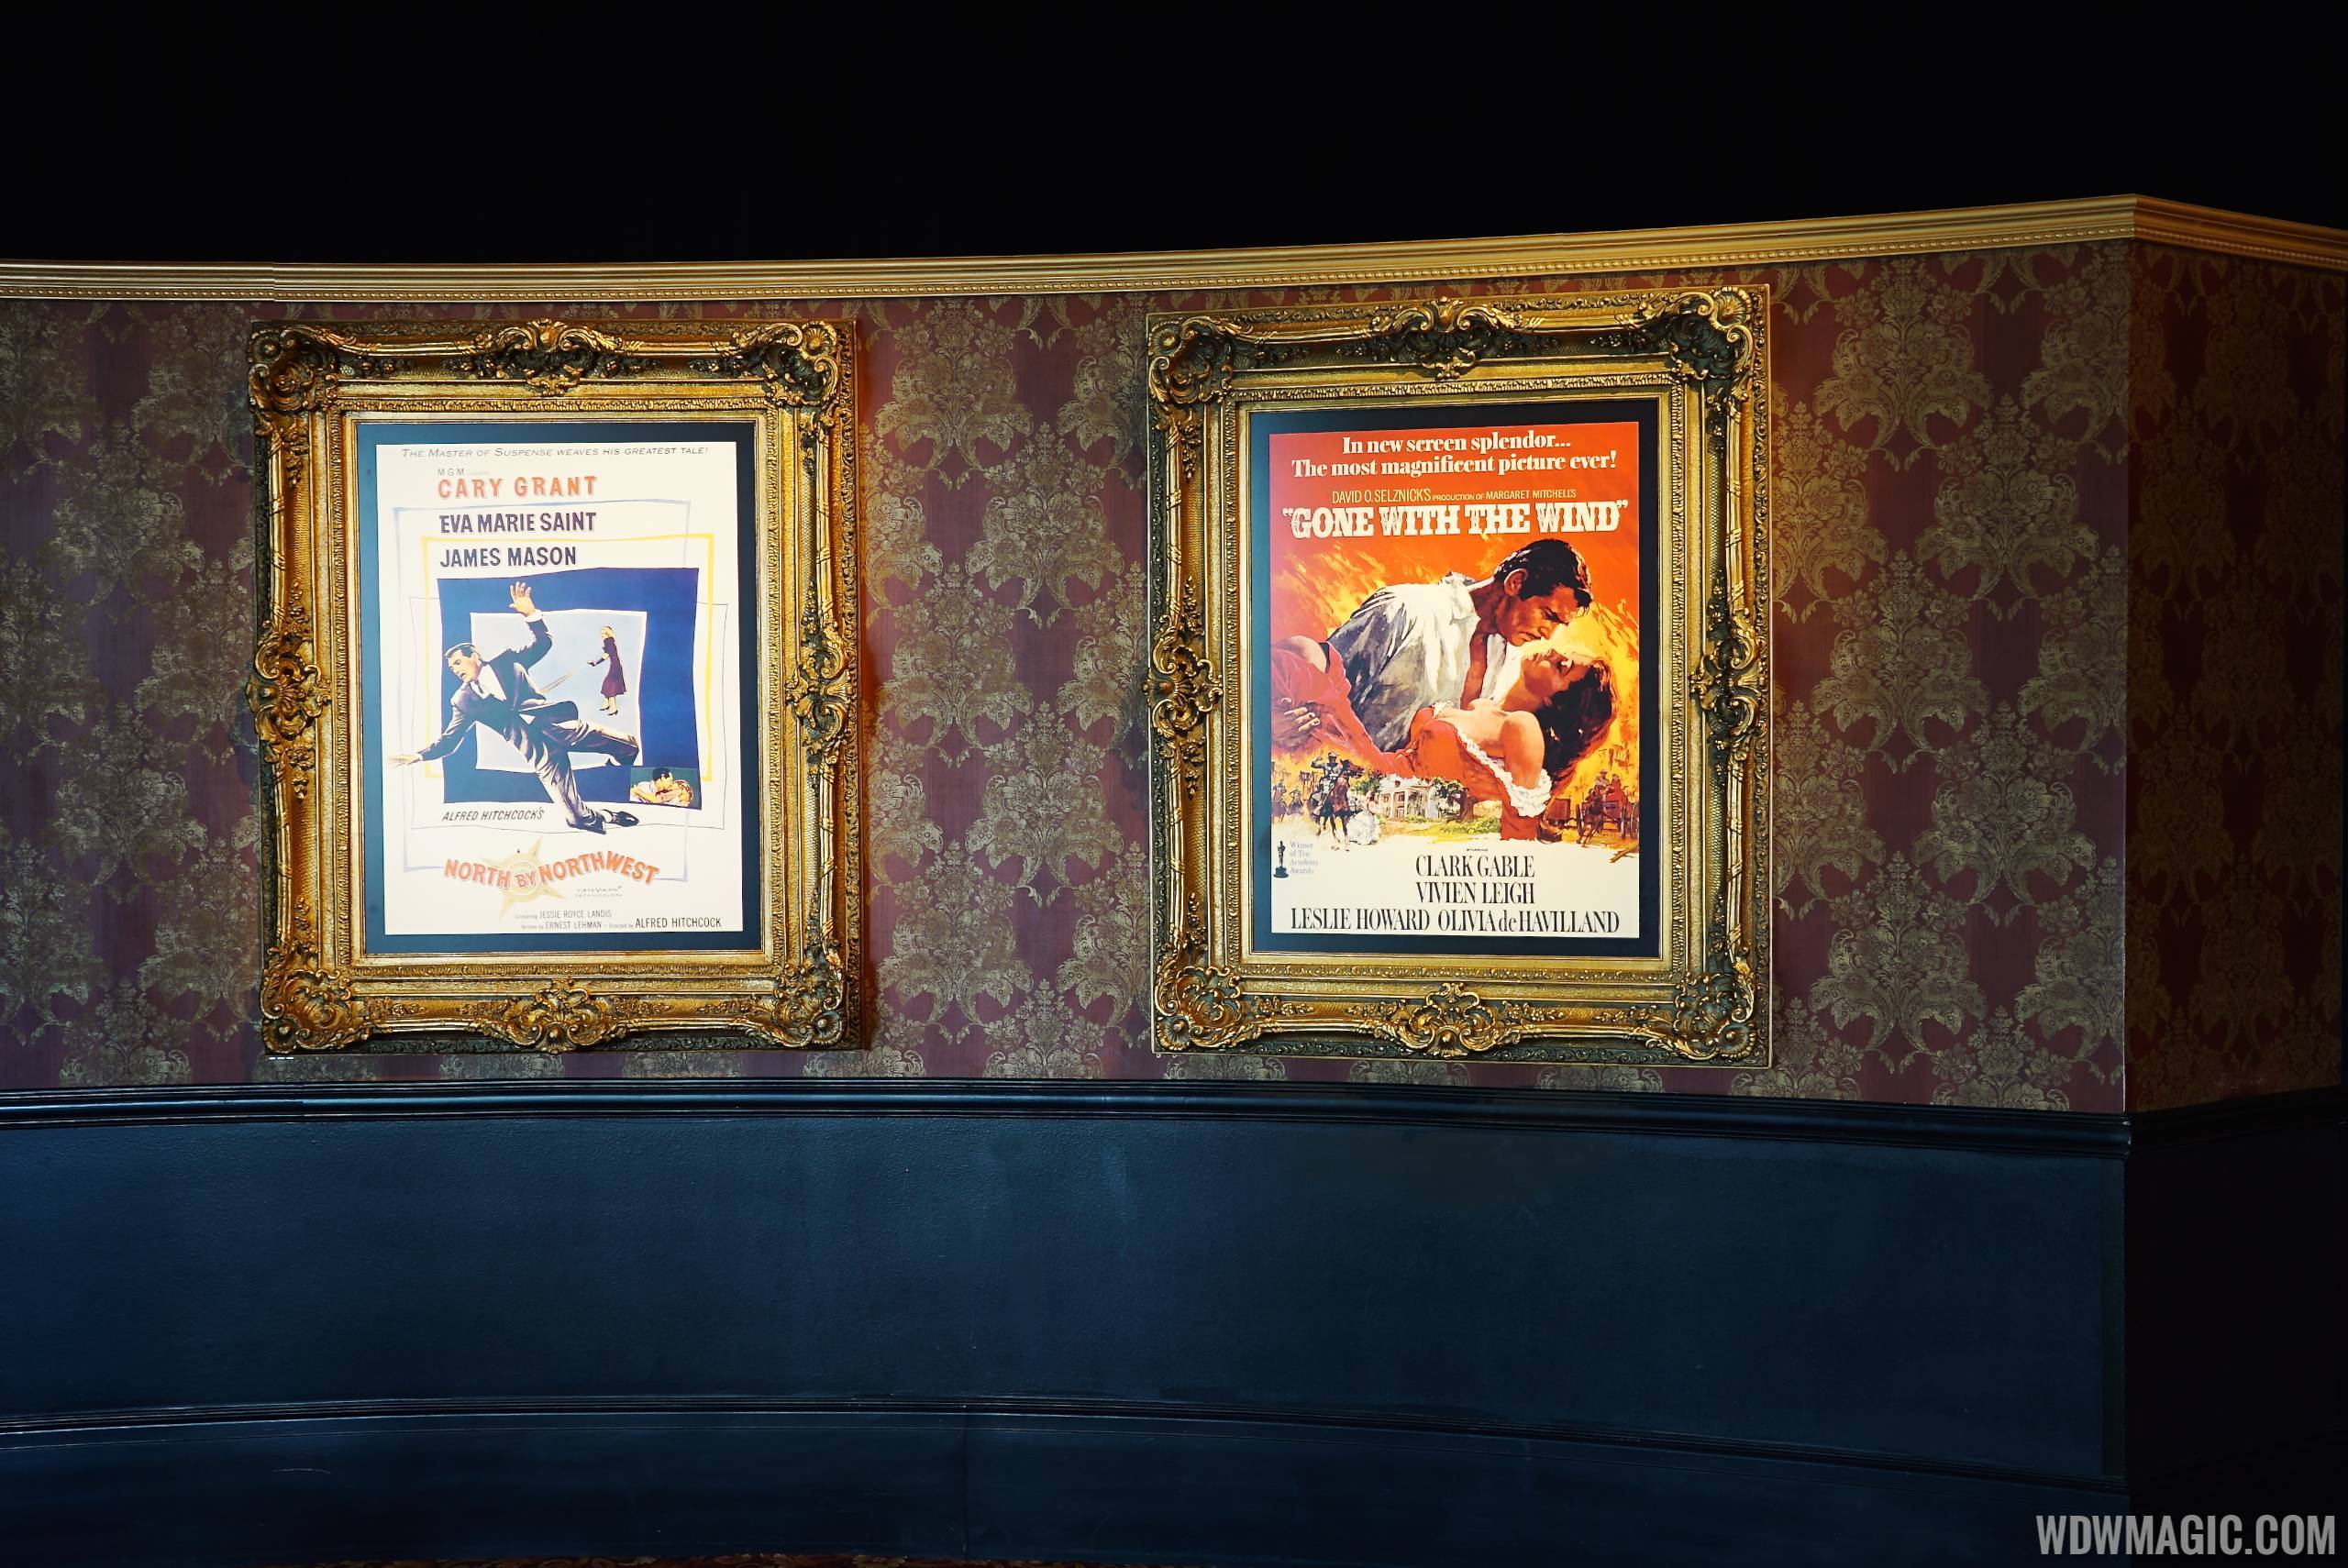 PHOTOS - A final look at the now closed American Film Institute Showcase